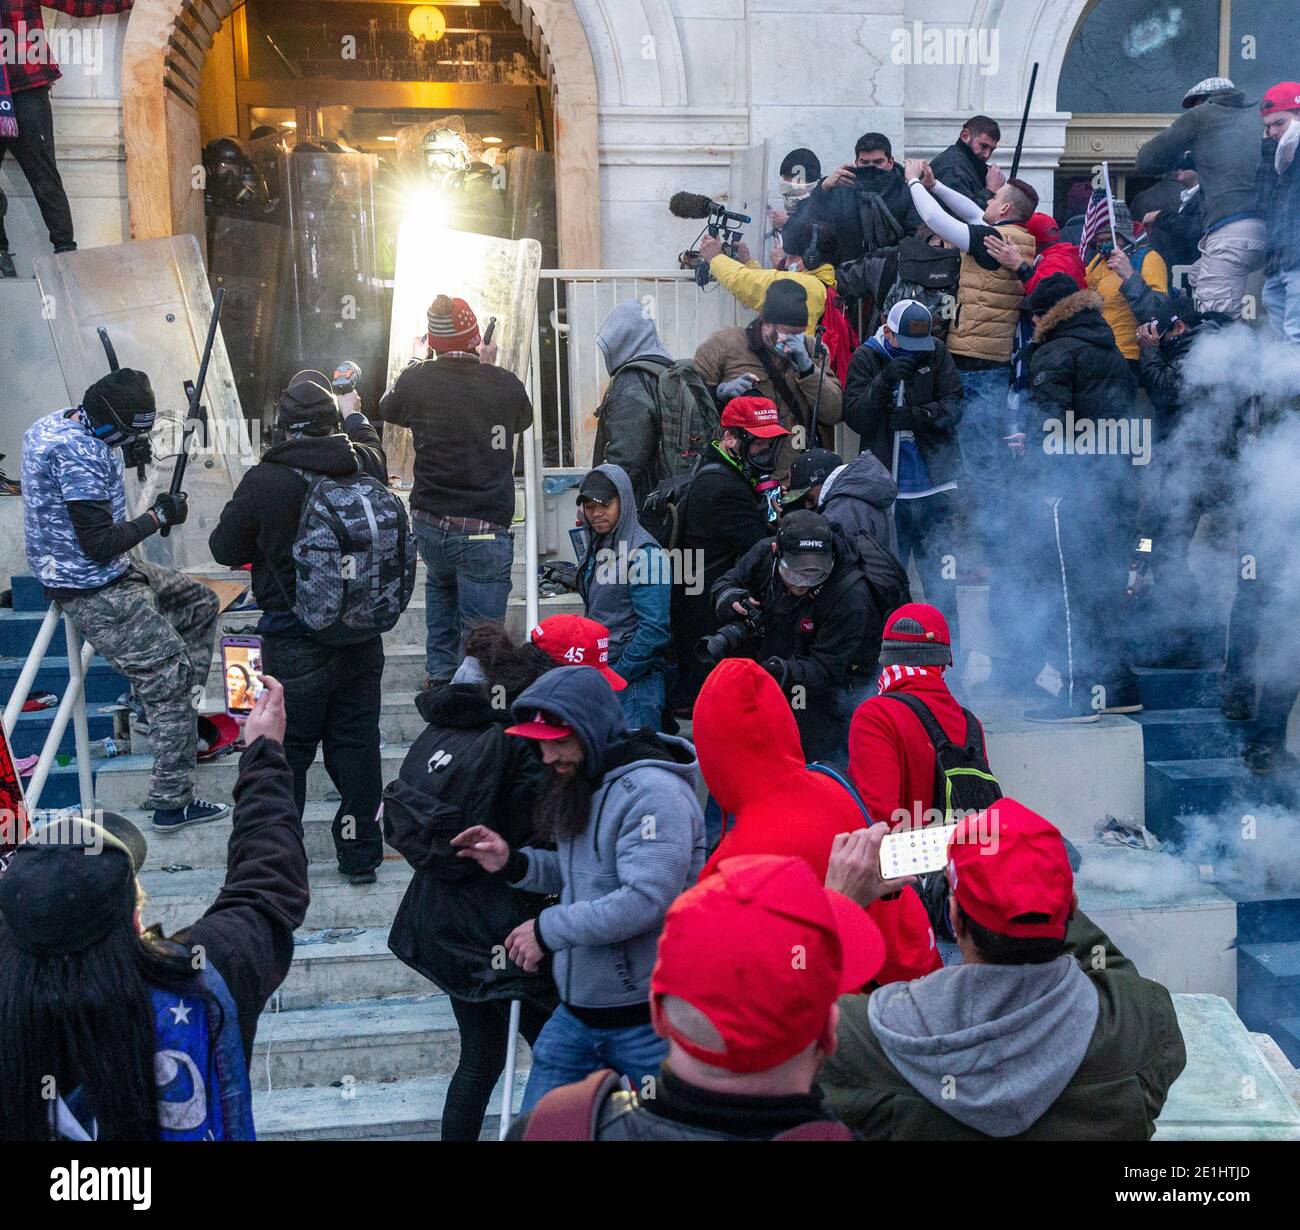 Washington, DC - January 6, 2021: Police use tear gas around Capitol building where pro-Trump supporters riot and breached the Capitol Stock Photo